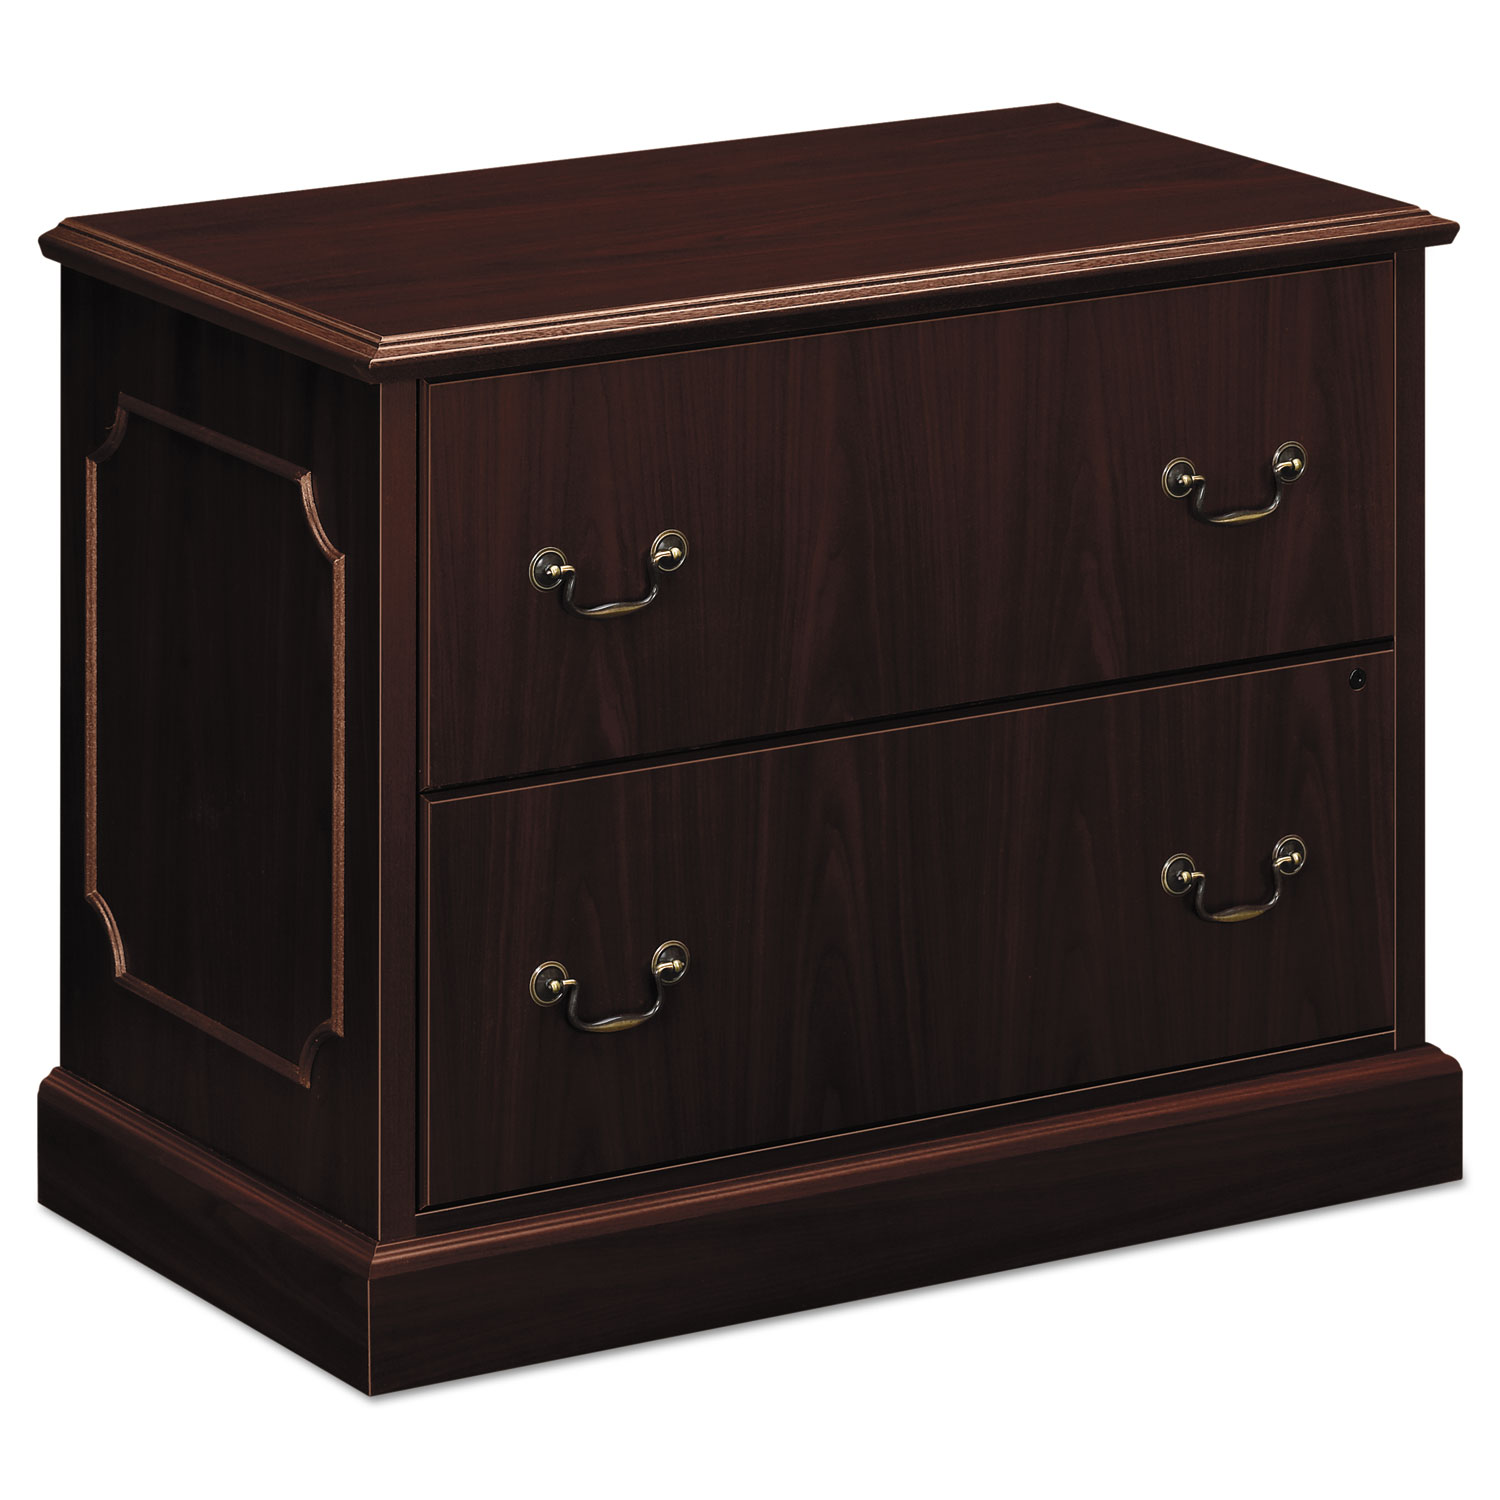 HON 94000 Series Two-Drawer Lateral File, 37-1/2w x 20-1/2d x 29-1/2h, Mahogany